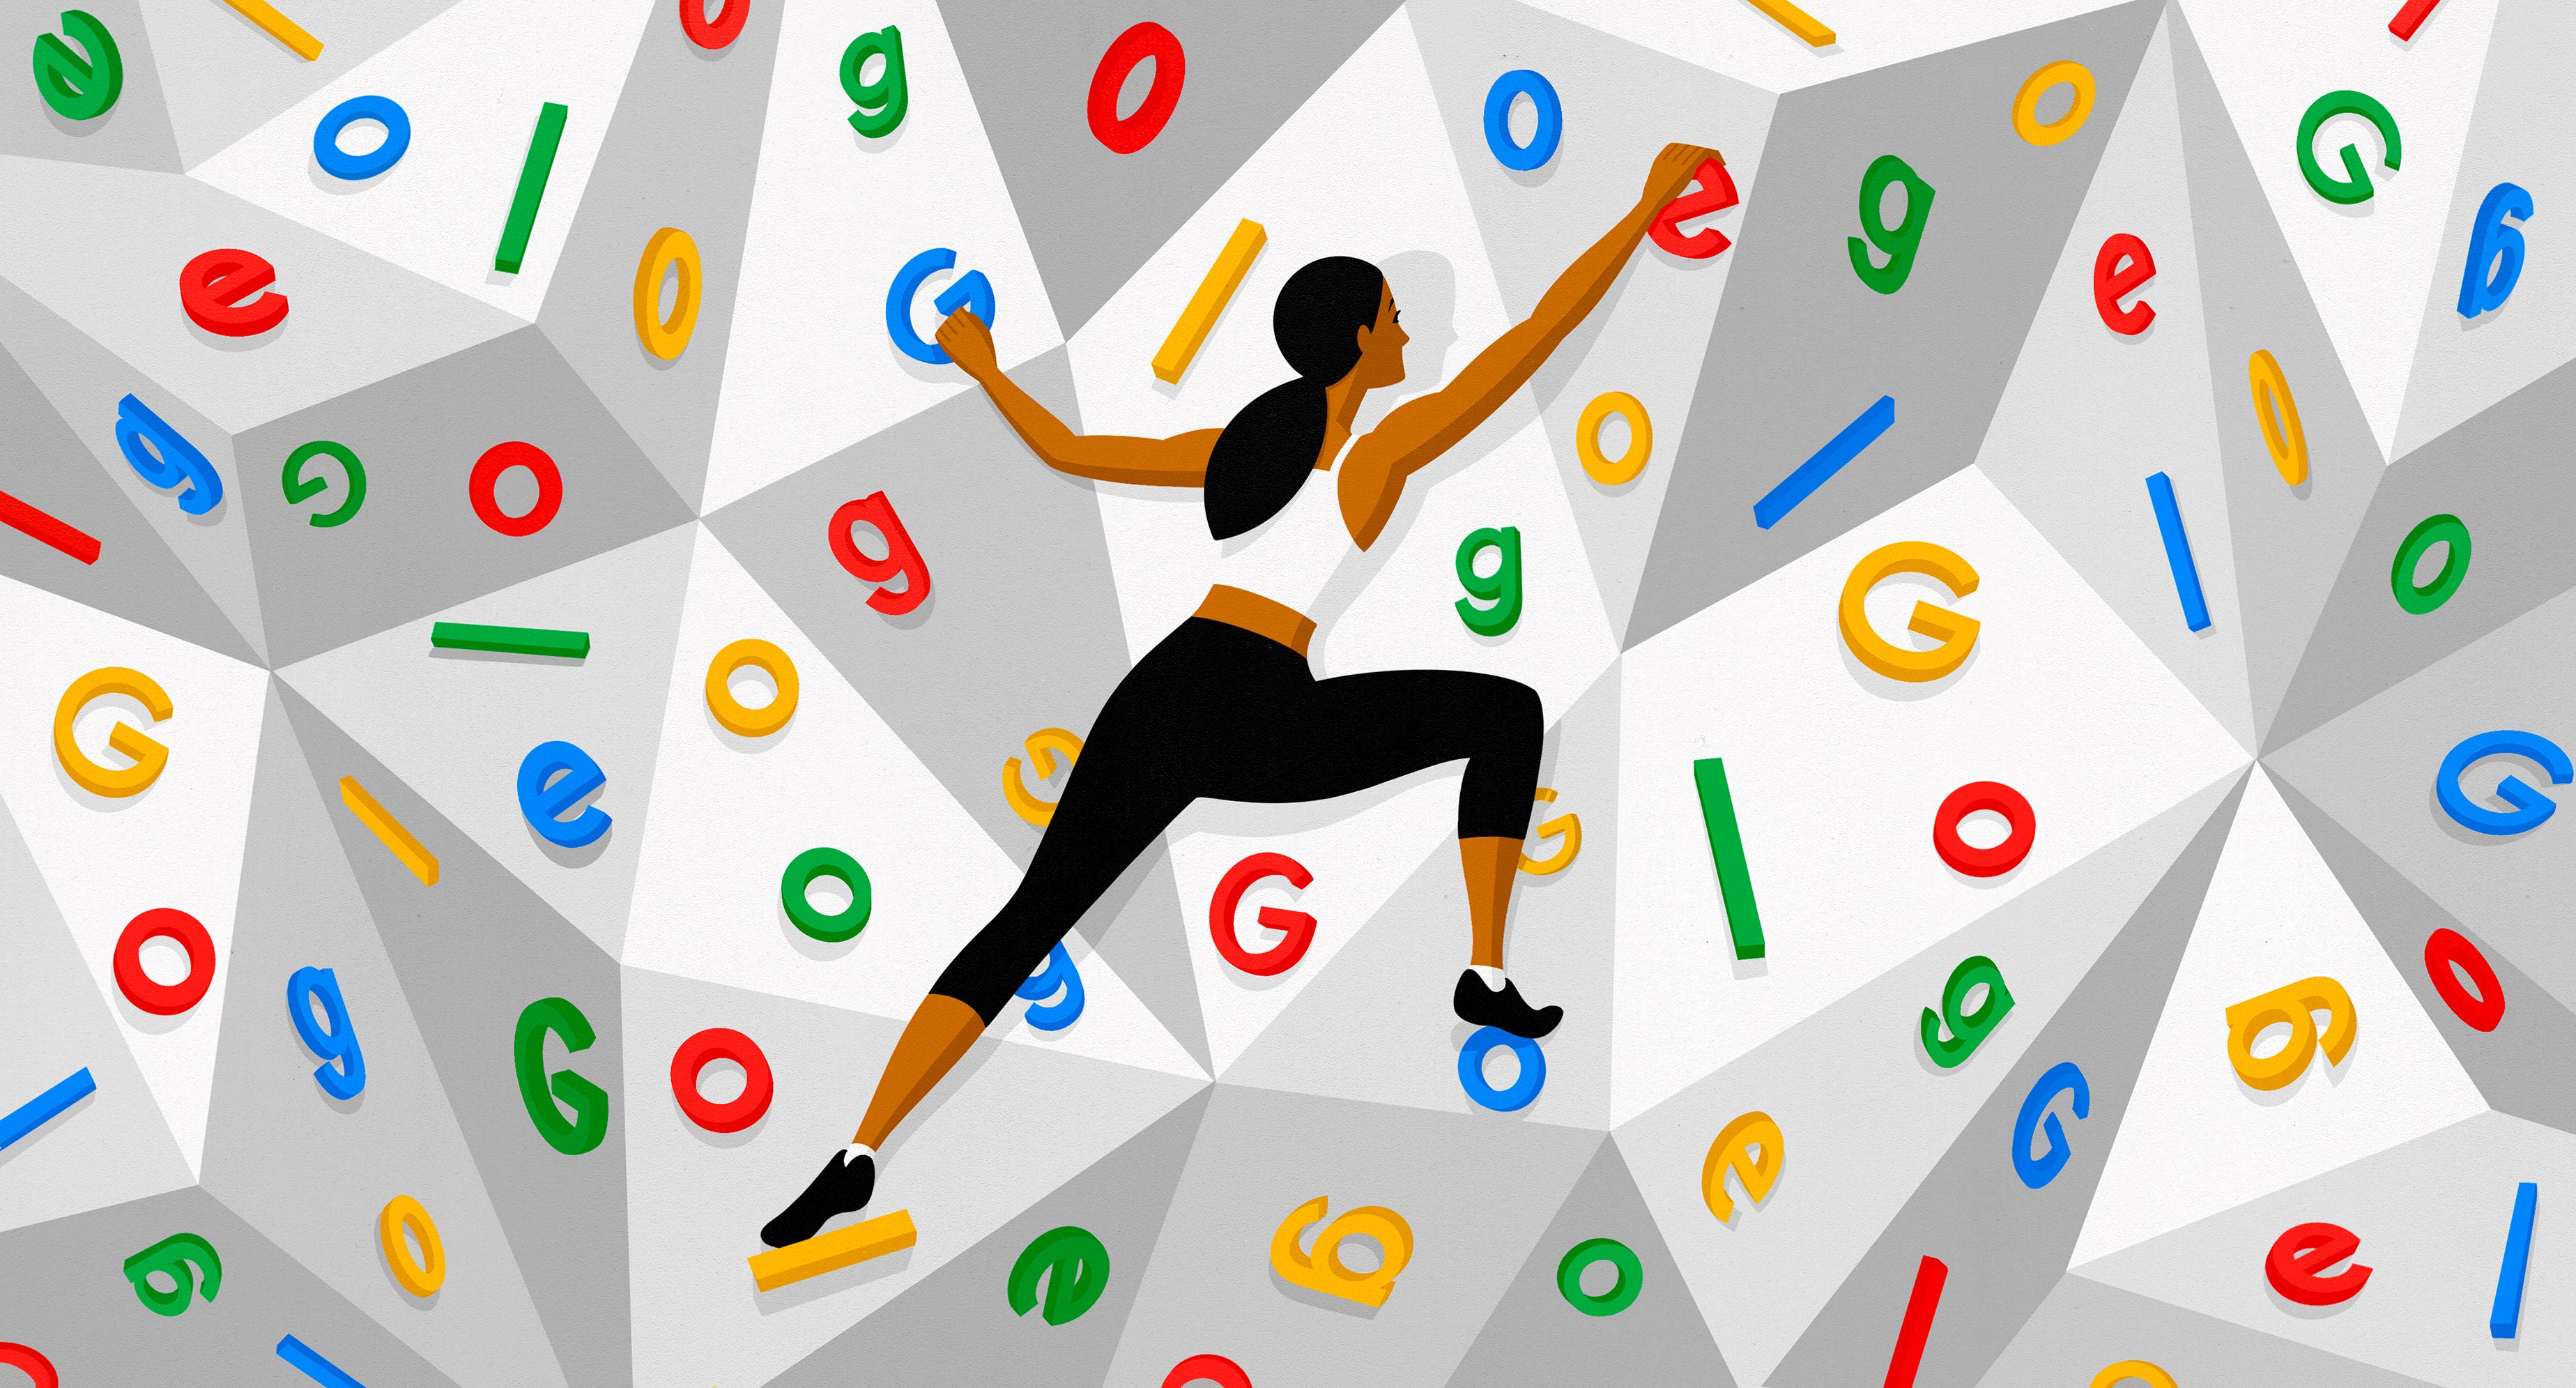 Illustration of a person climbing a wall made from the letters of the word “Google” representing the SEO process.